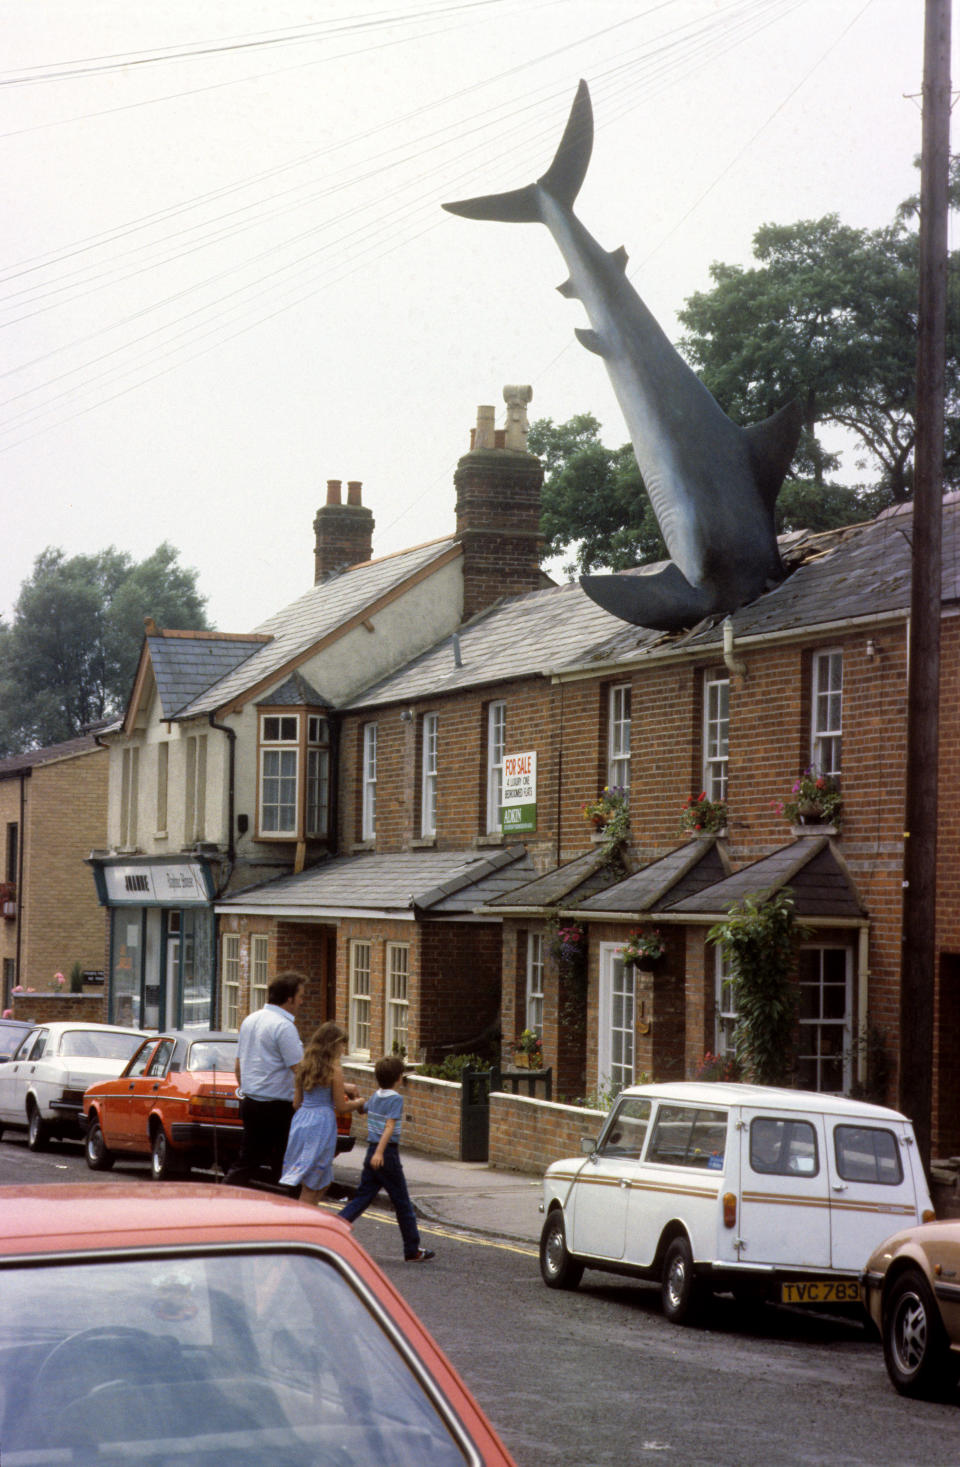 EDITORIAL USE ONLY: A MASSIVE SHARK APPEARS TO HAVE NOSE-DIVED INTO A PRETTY ROW OF TERRACED COTTAGES AT HEADINGTON, OXFORDSHIRE.